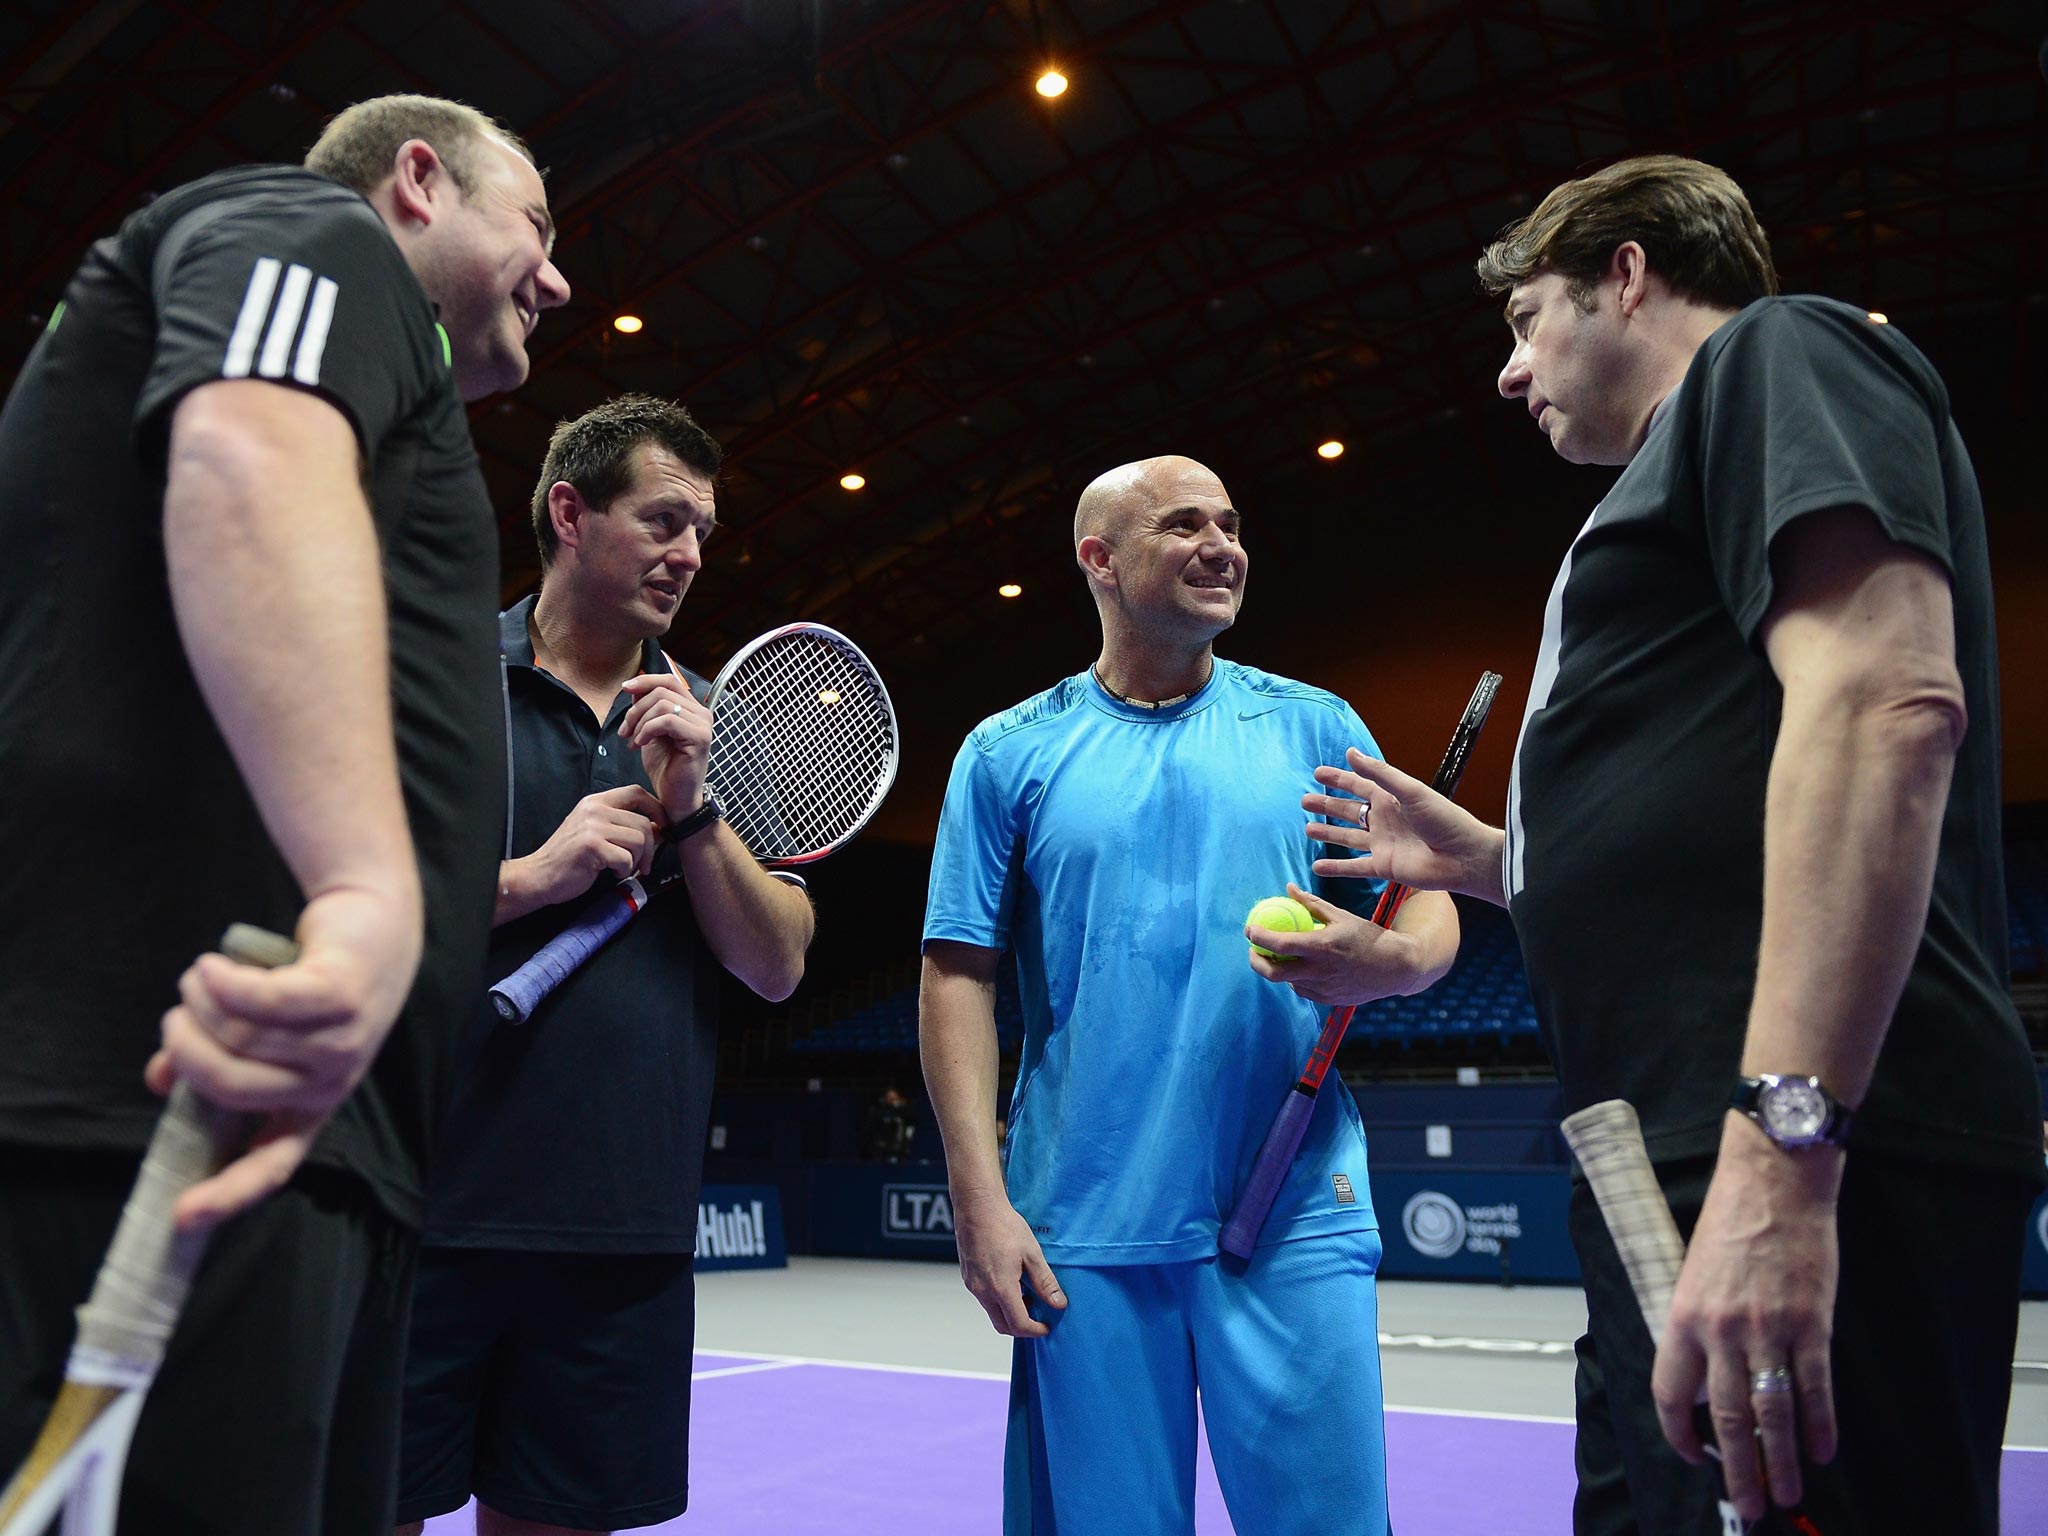 Andre Agassi (centre) chats with TV celebrity Jonathan Ross during the World Tennis Day event at Earls Court